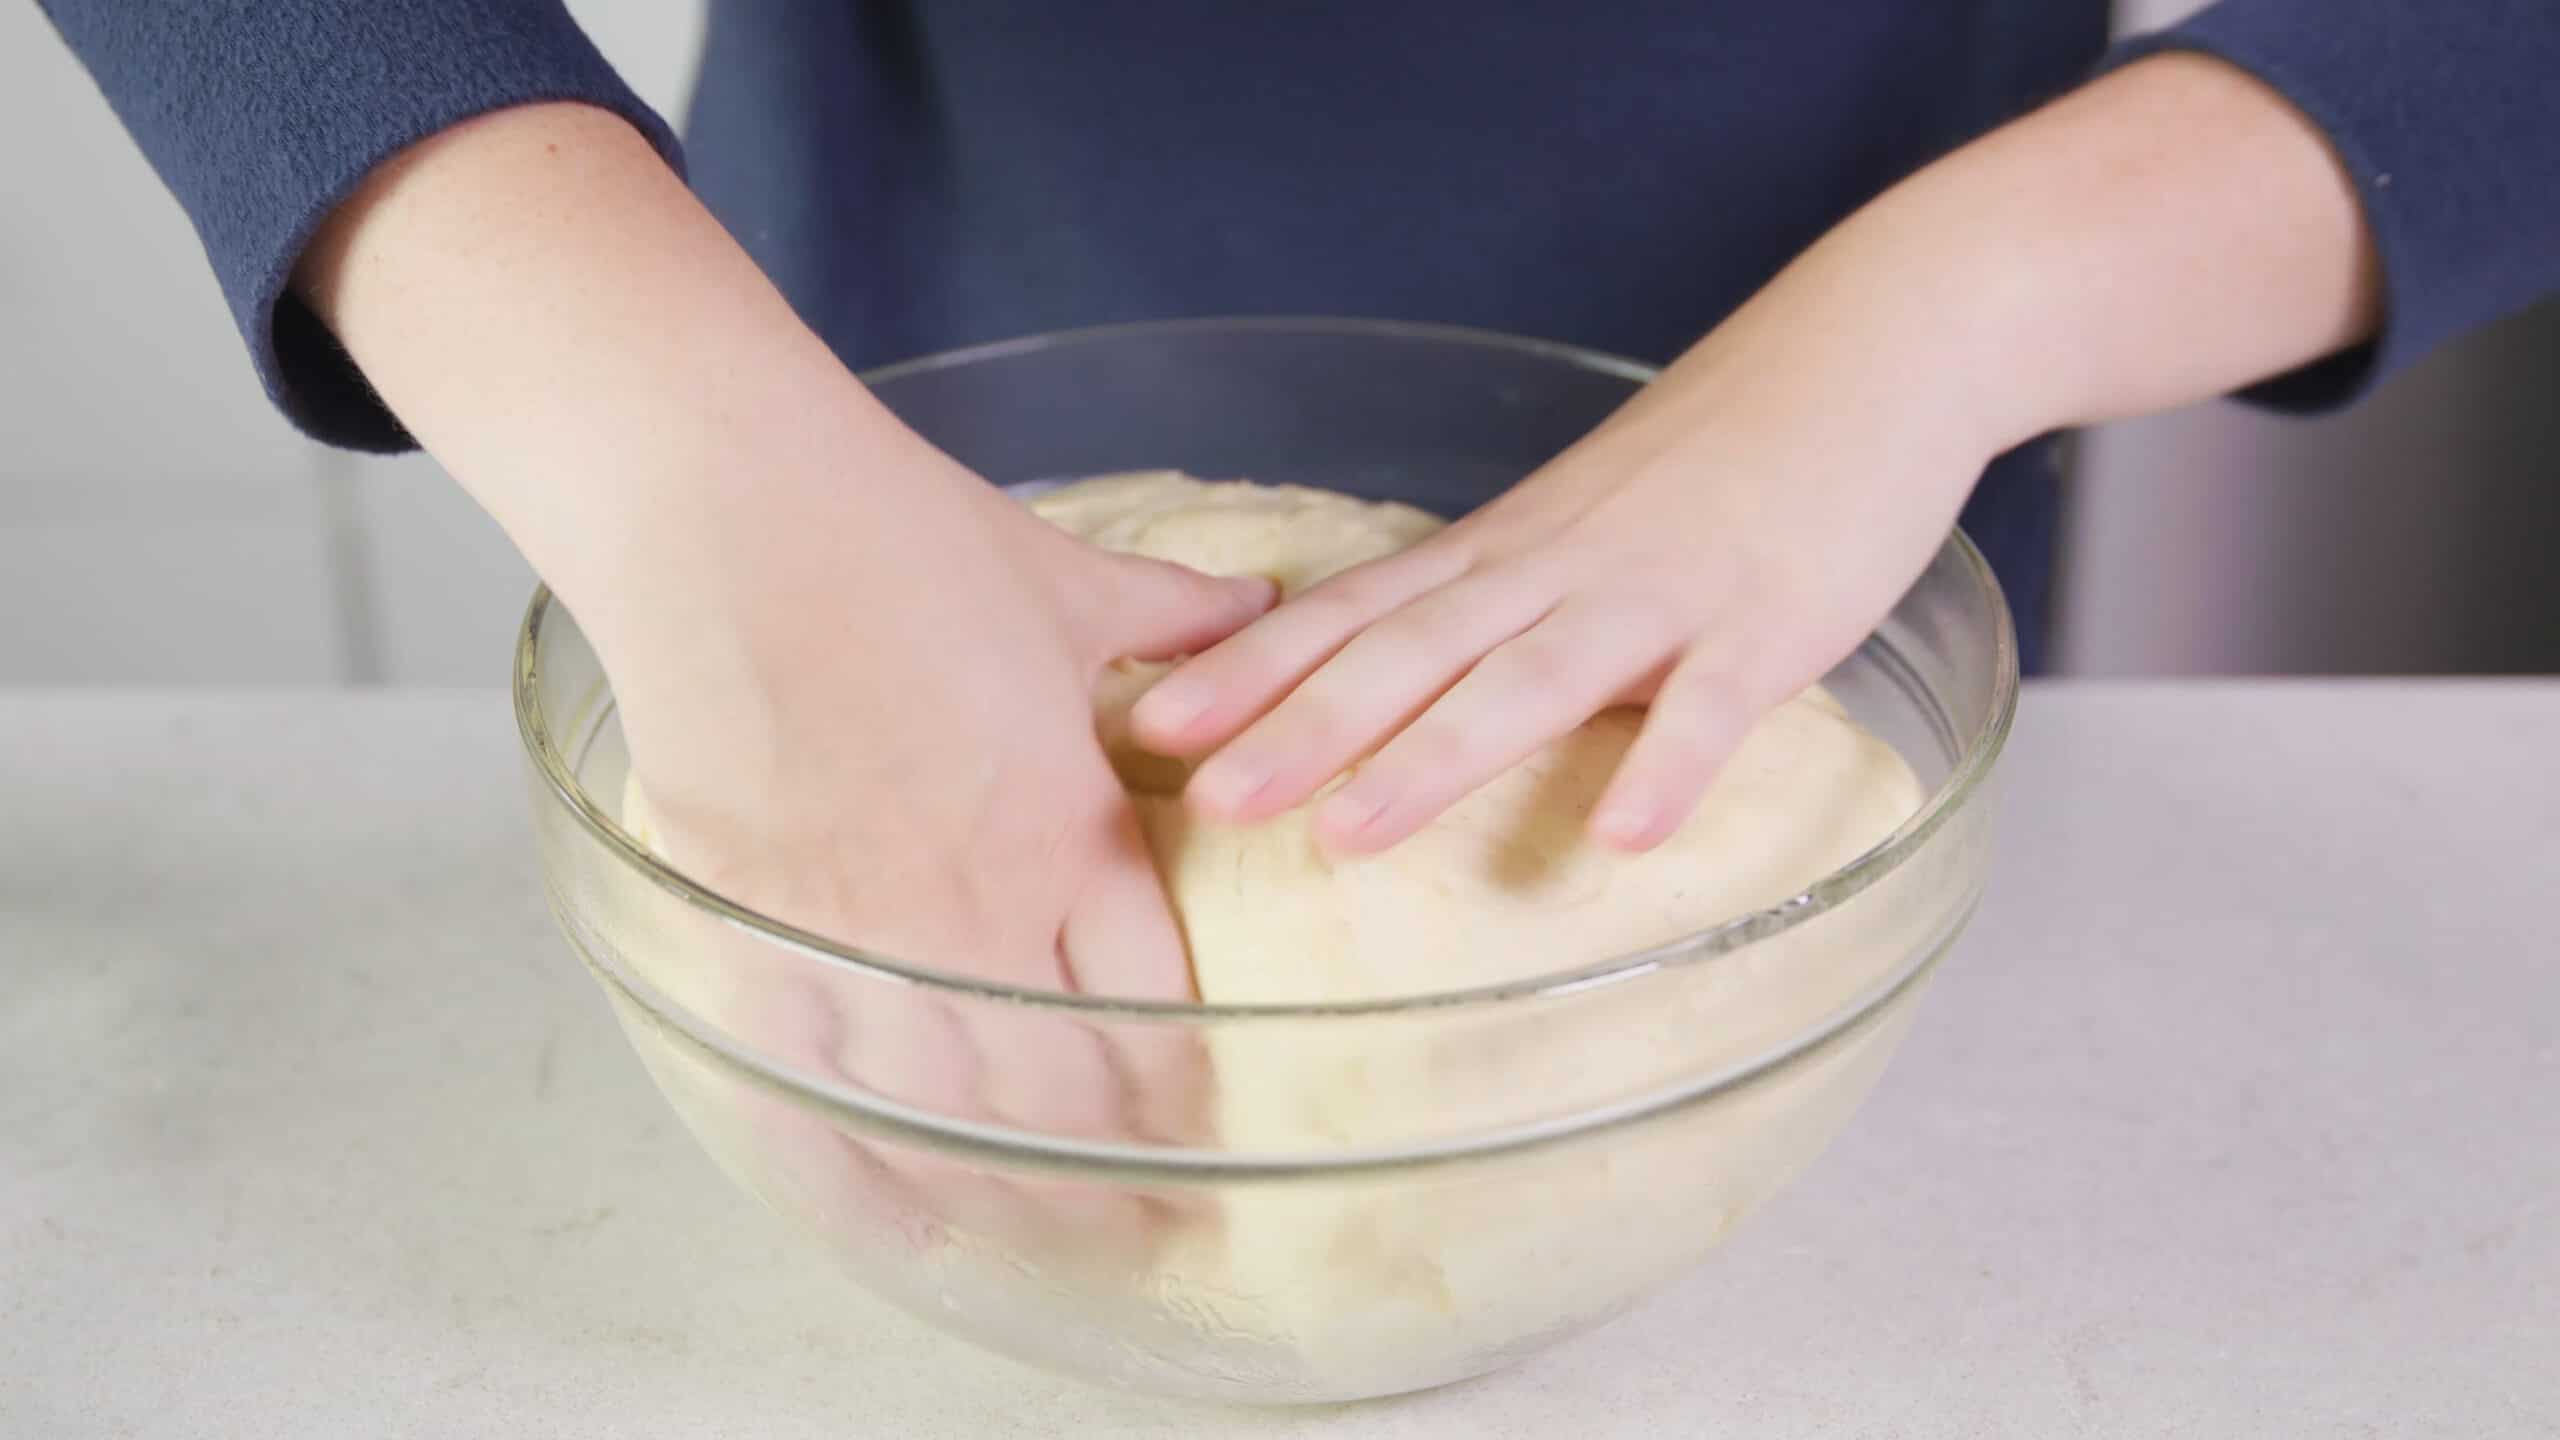 Angled view of risen dough in large clear glass mixing bowl being split into two equal portions.